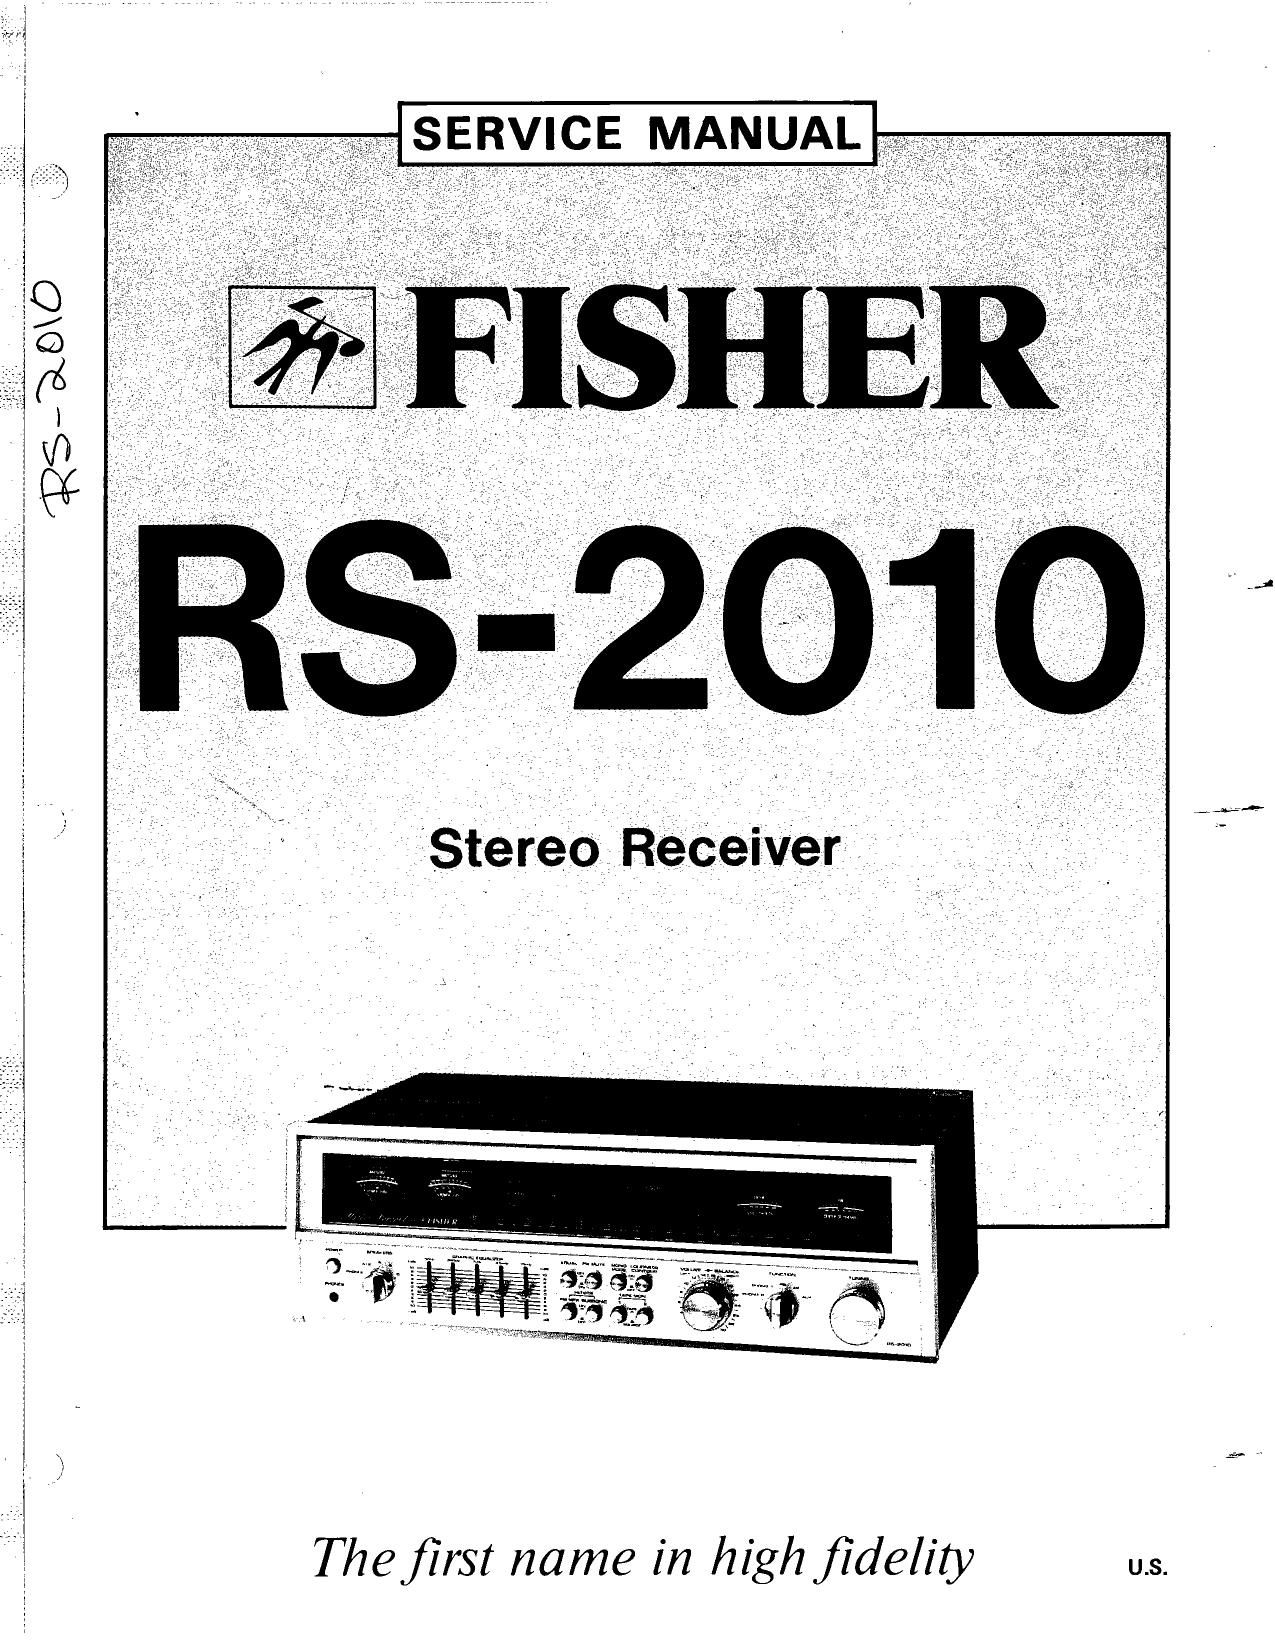 Fisher RS 2010 Service Manual